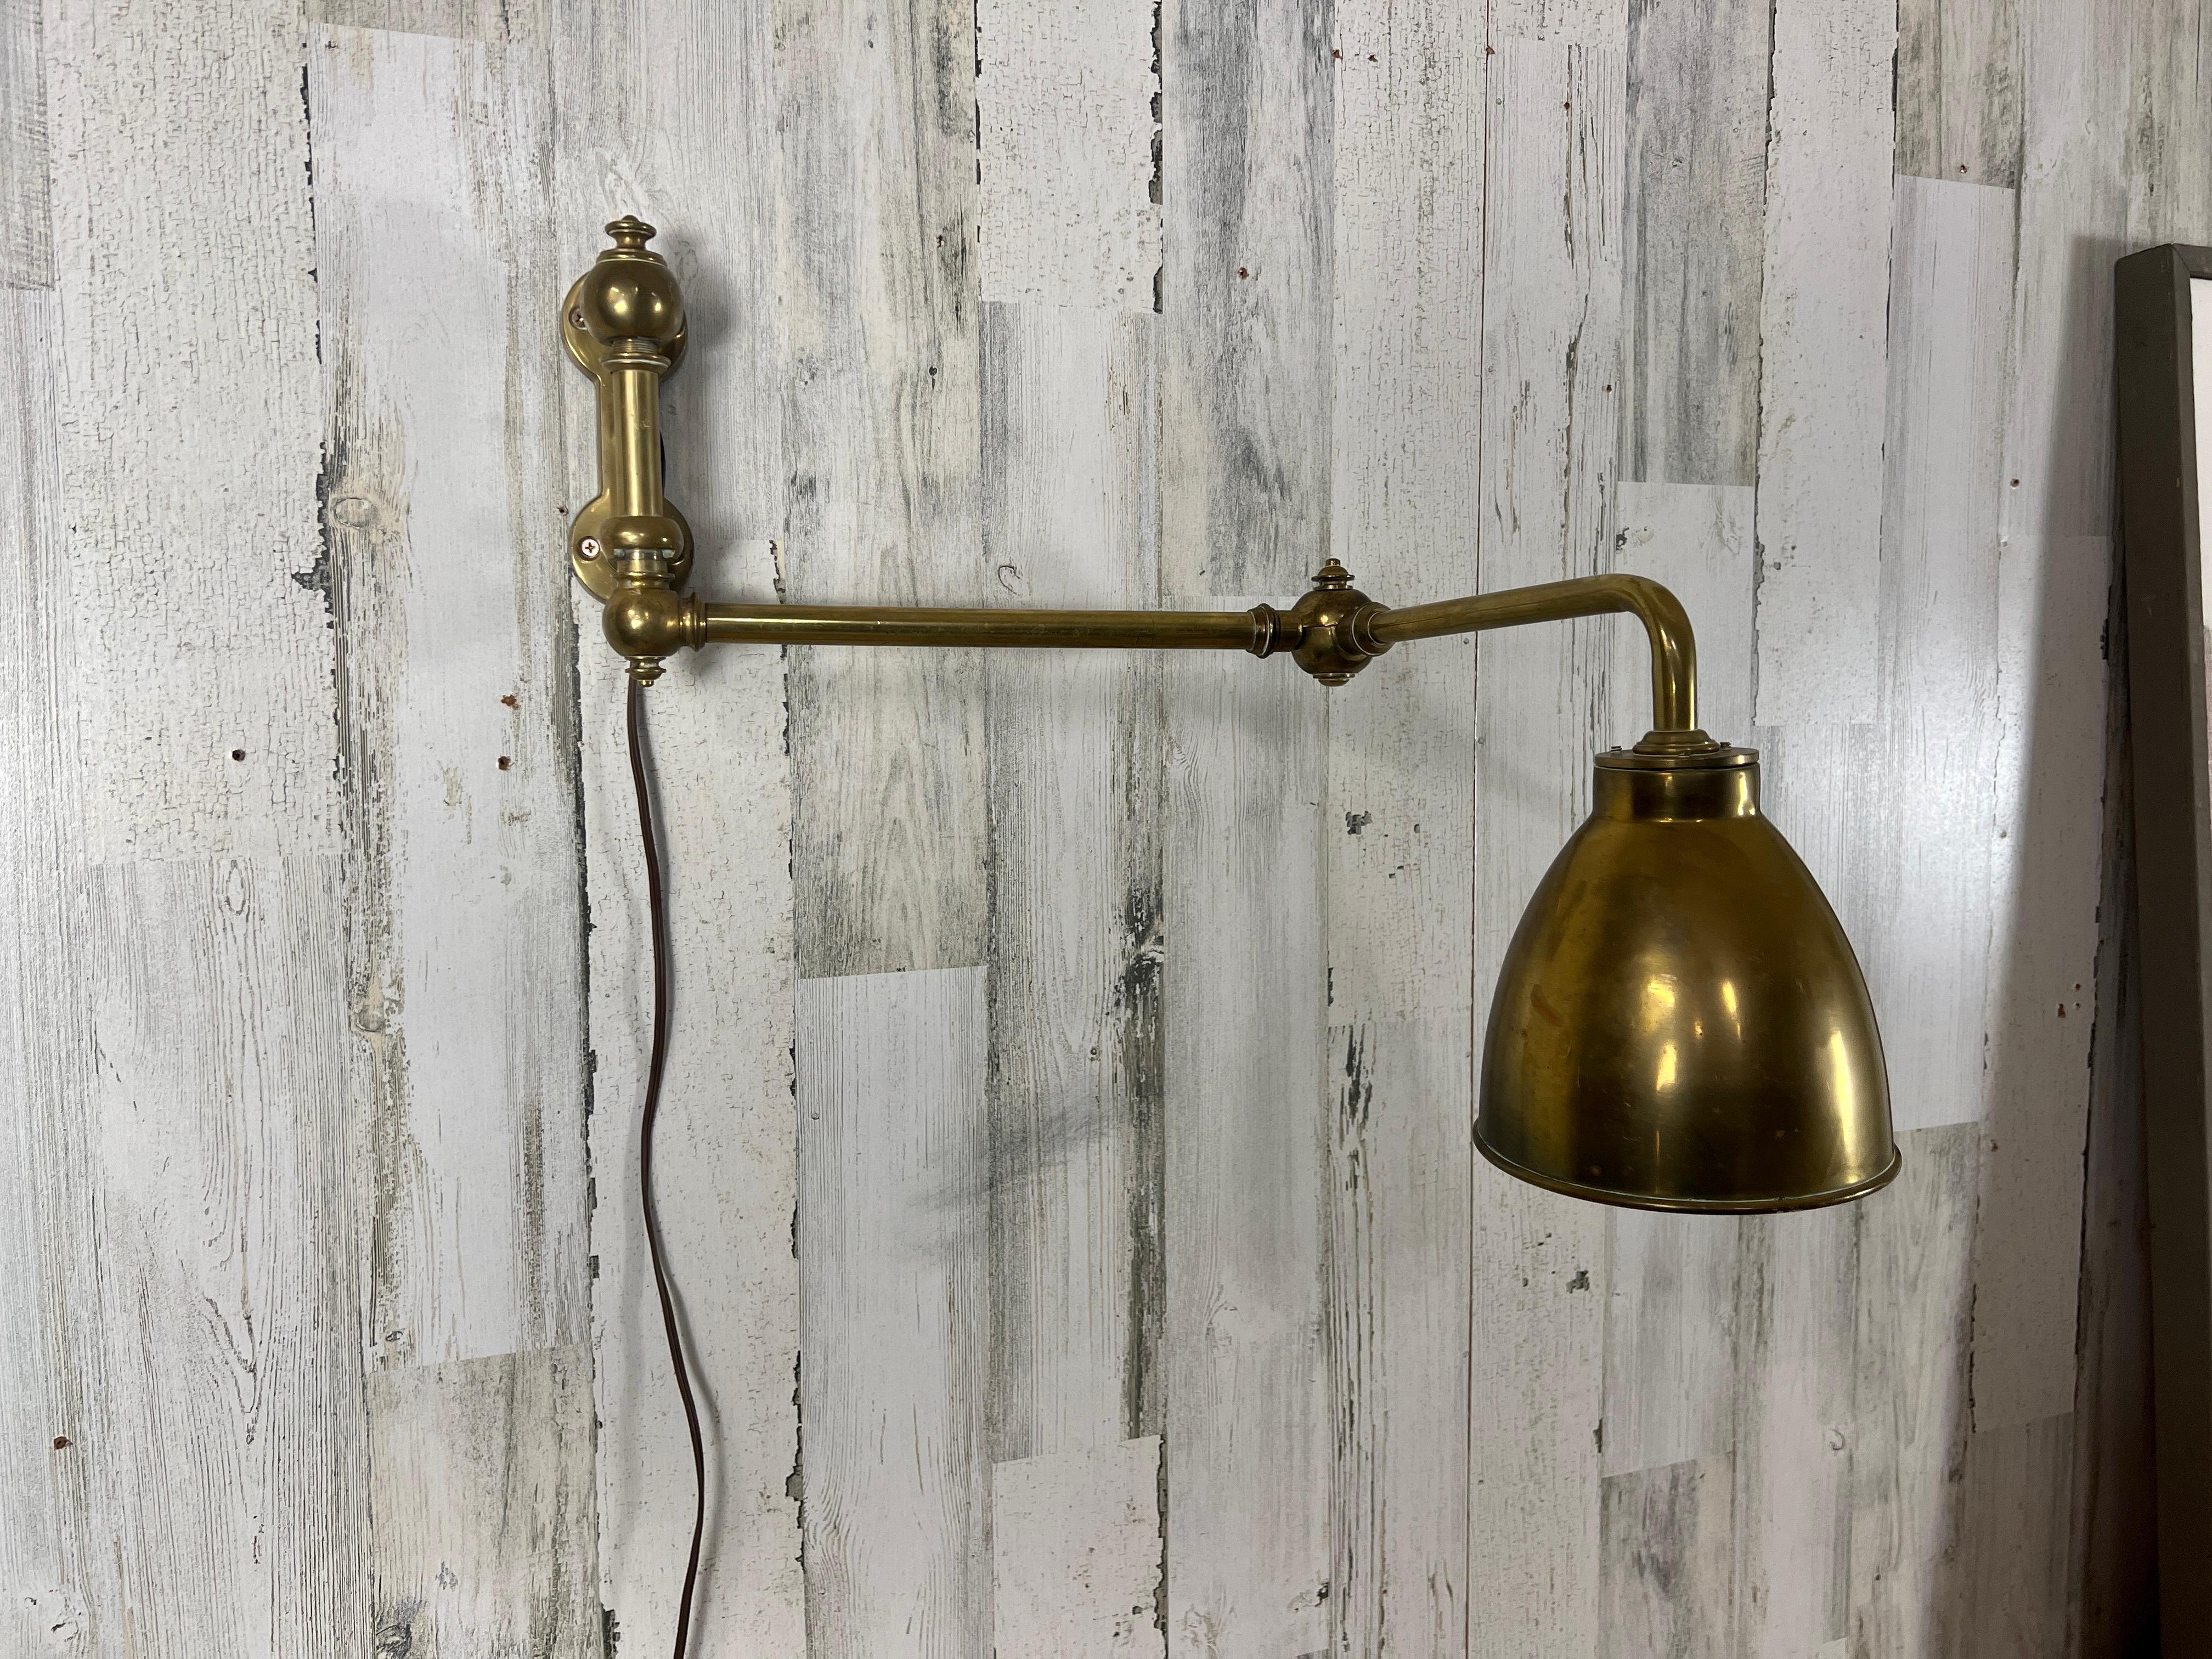  Articulated Brass Sconce In Good Condition For Sale In Denton, TX